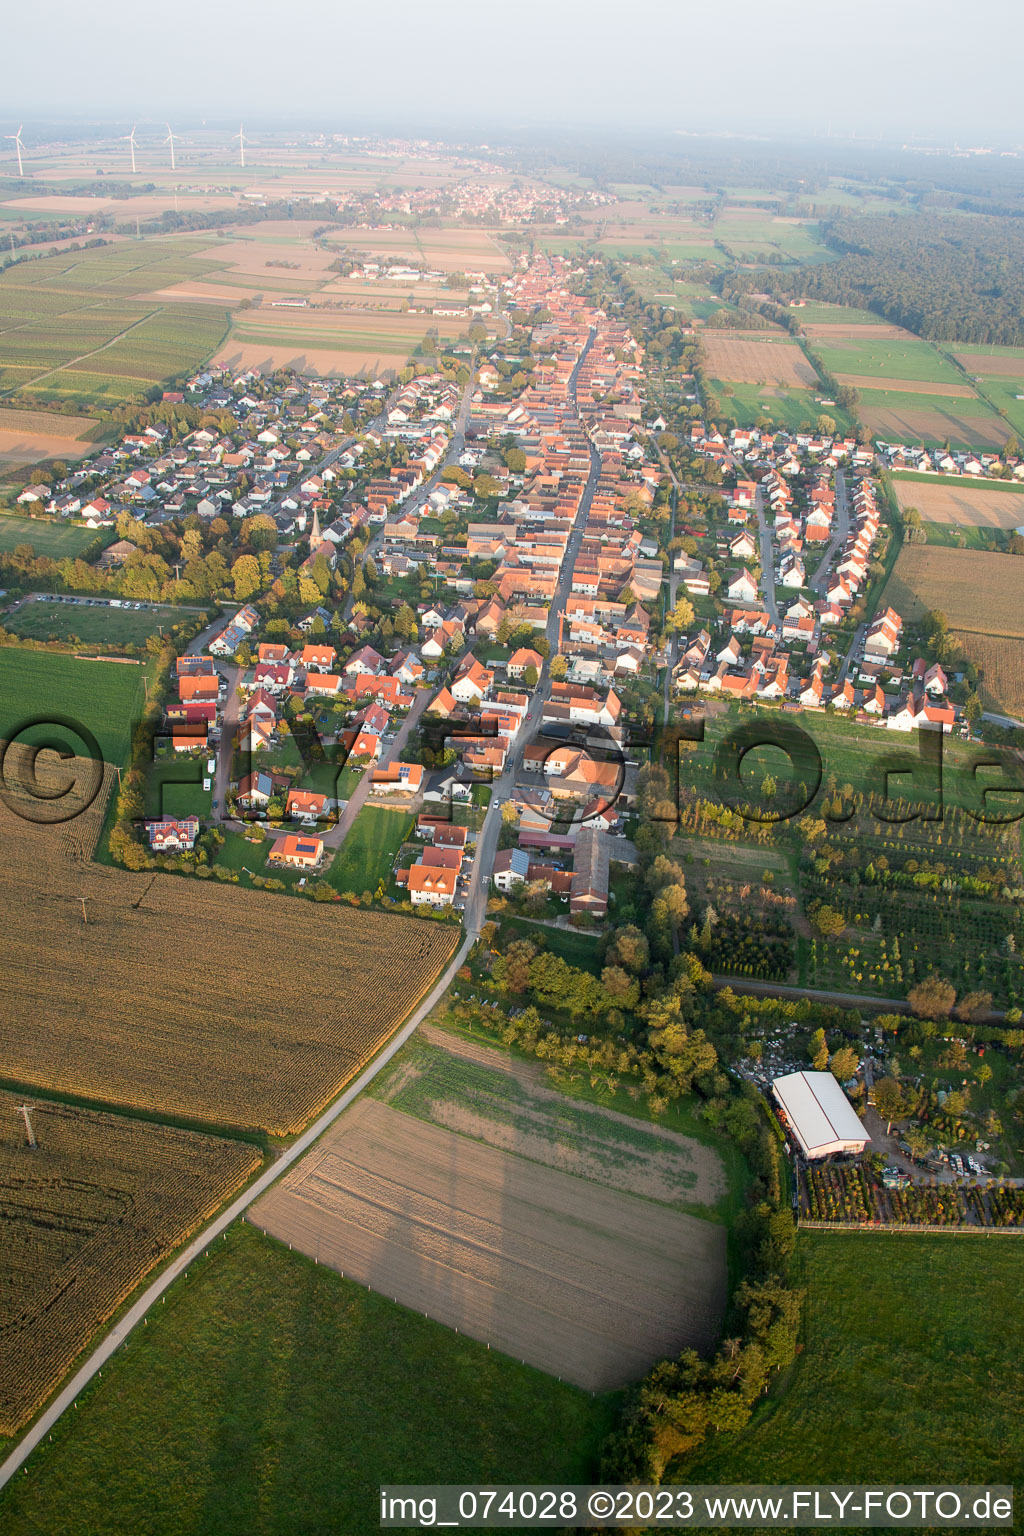 Freckenfeld in the state Rhineland-Palatinate, Germany from the plane